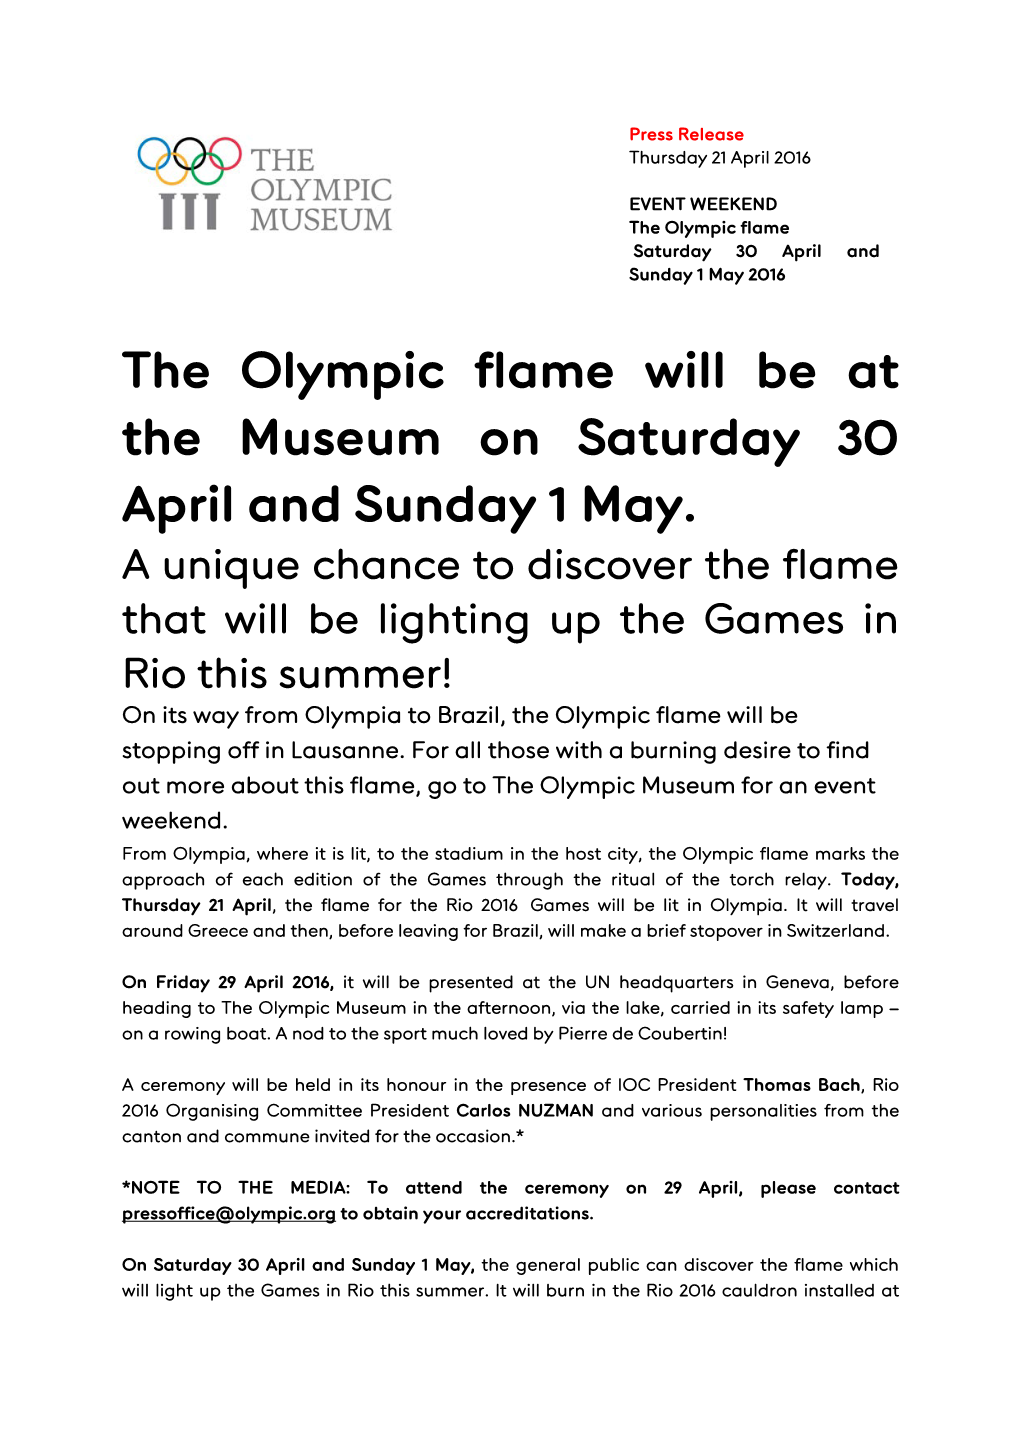 The Olympic Flame Will Be at the Museum on Saturday 30 April and Sunday 1 May